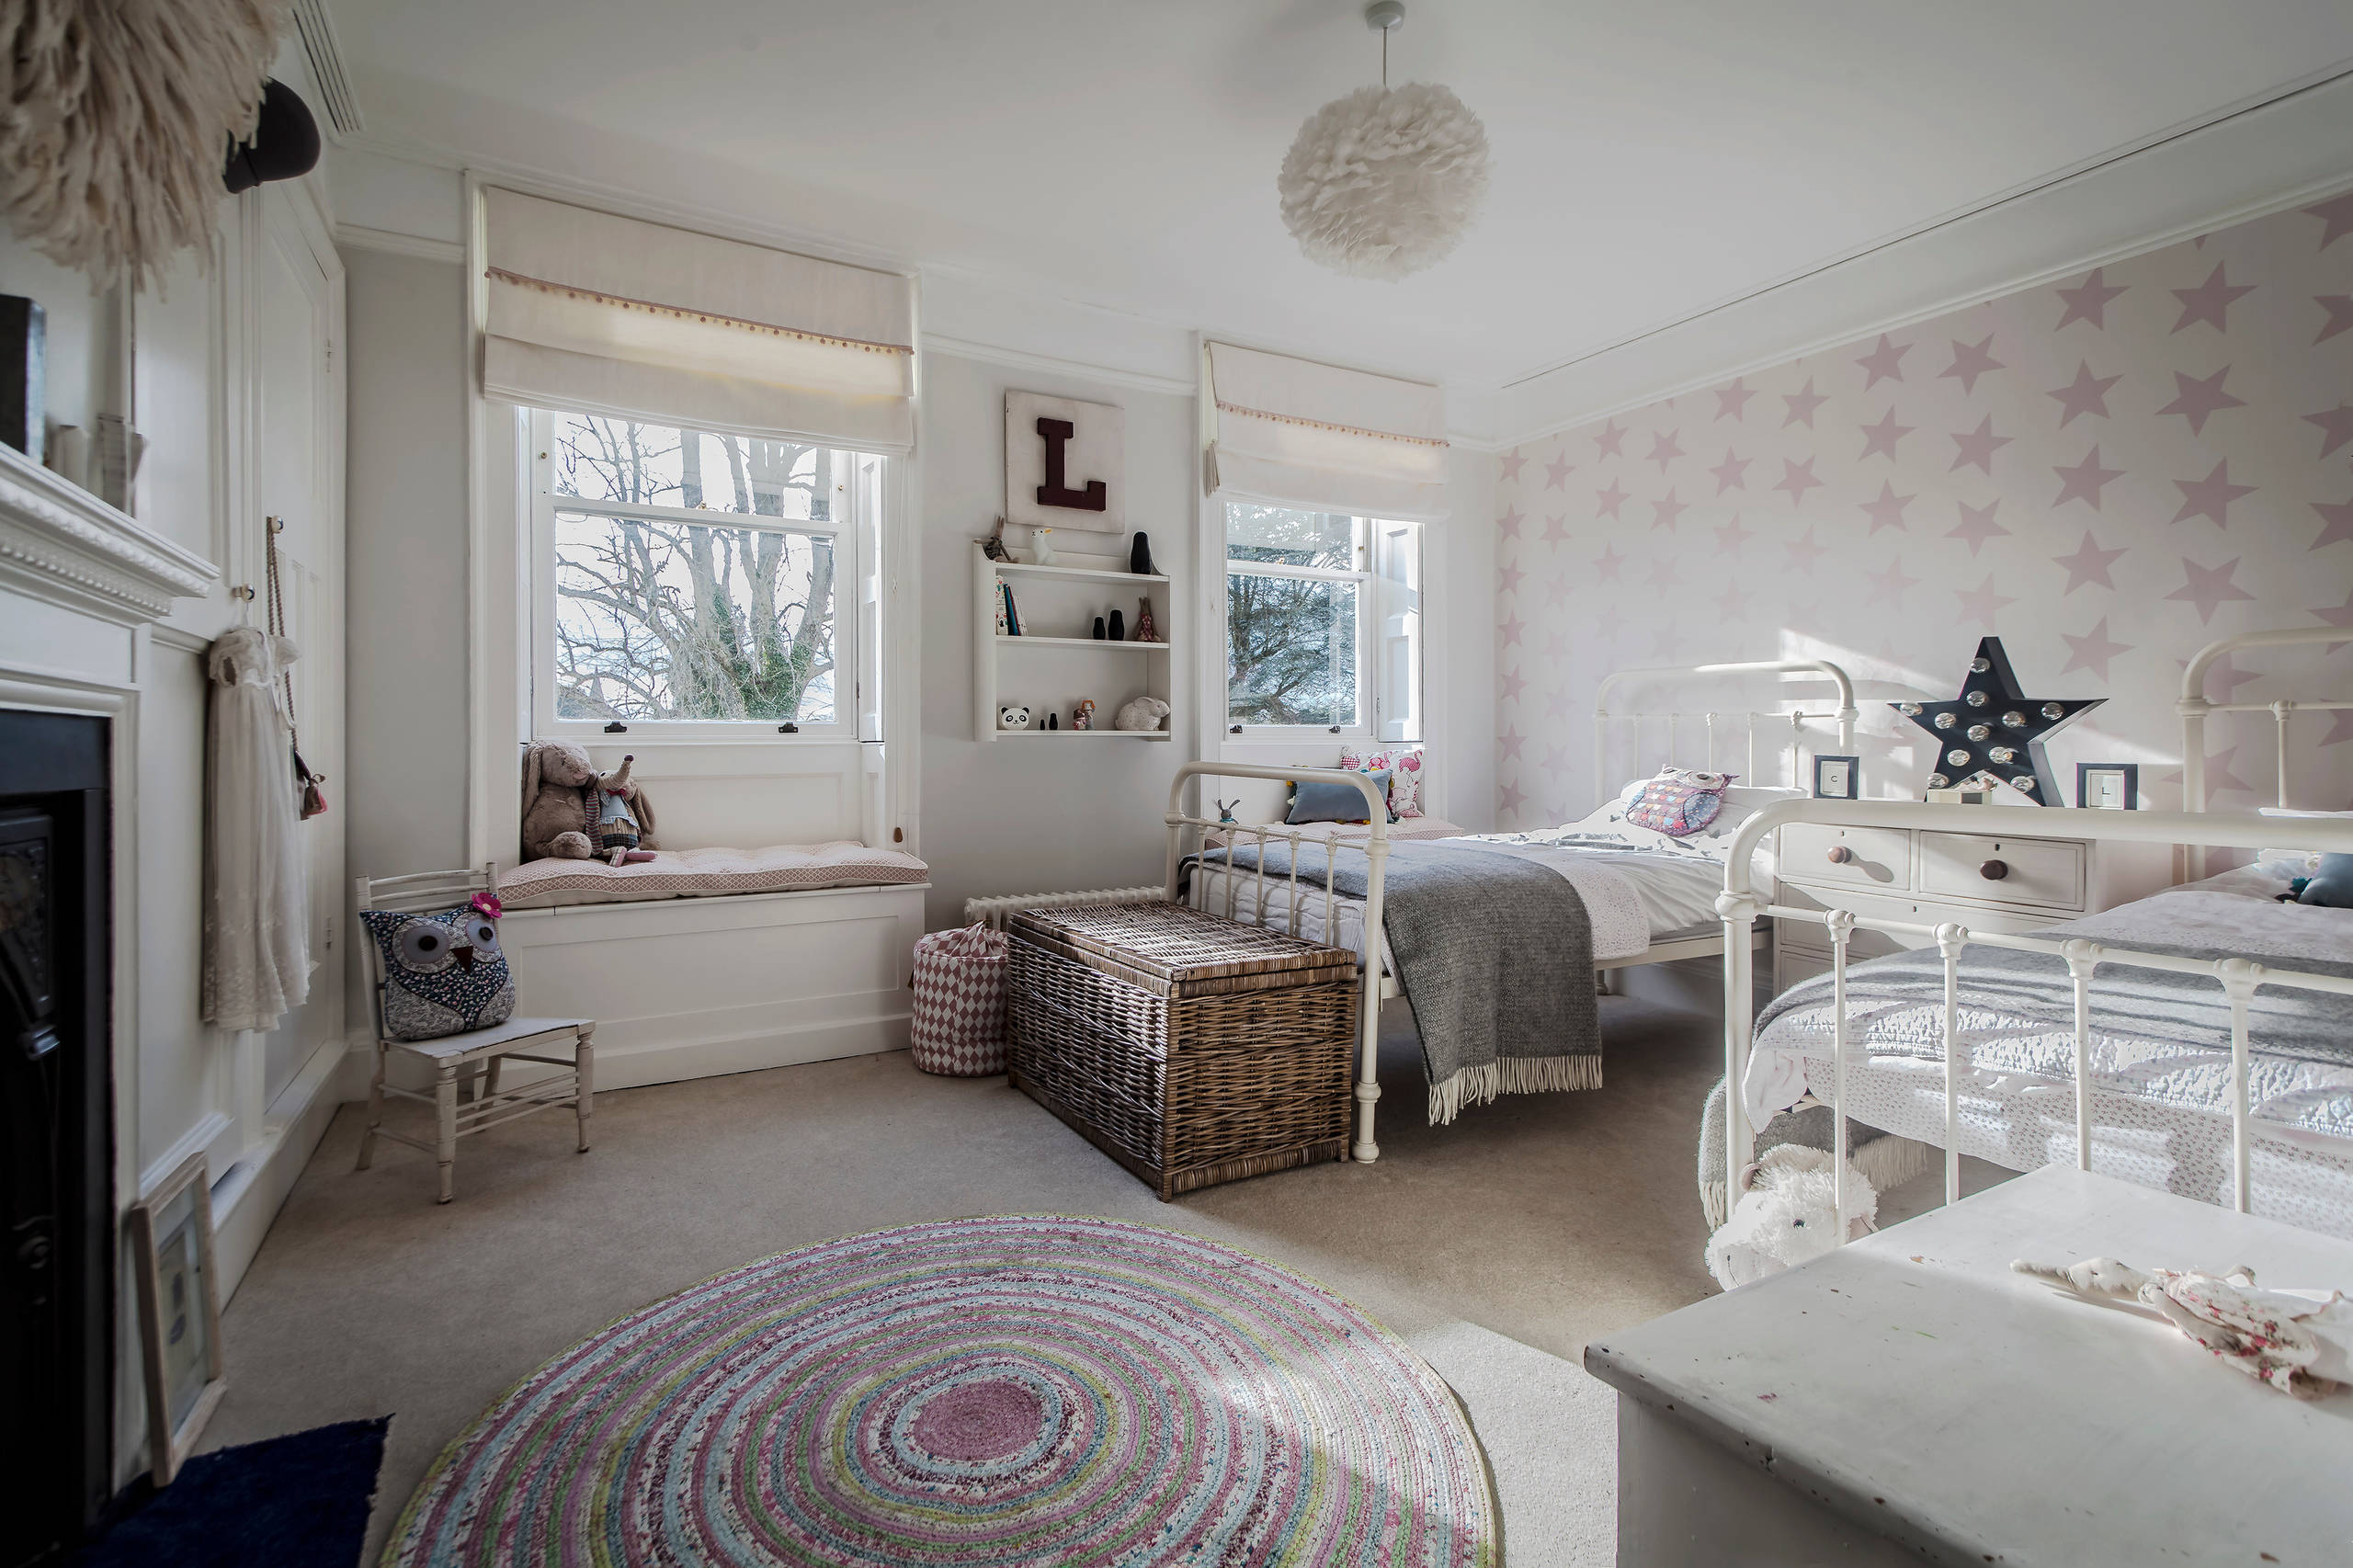 18 Magical Shabby-Chic Kids' Room Designs That Will Enchant You